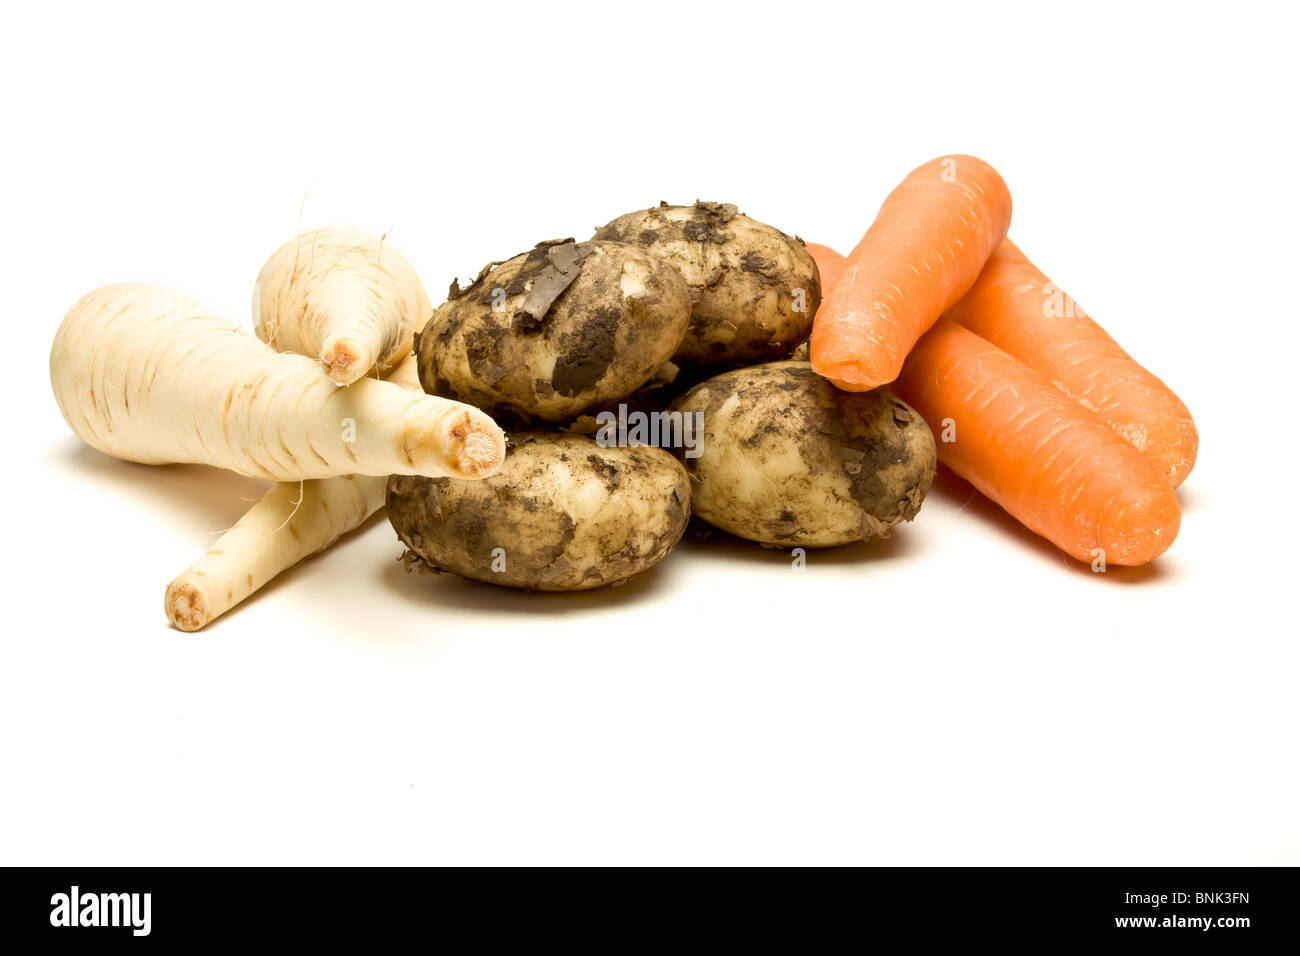 Three root vegetables from low perspective isolated against white background. Stock Photo